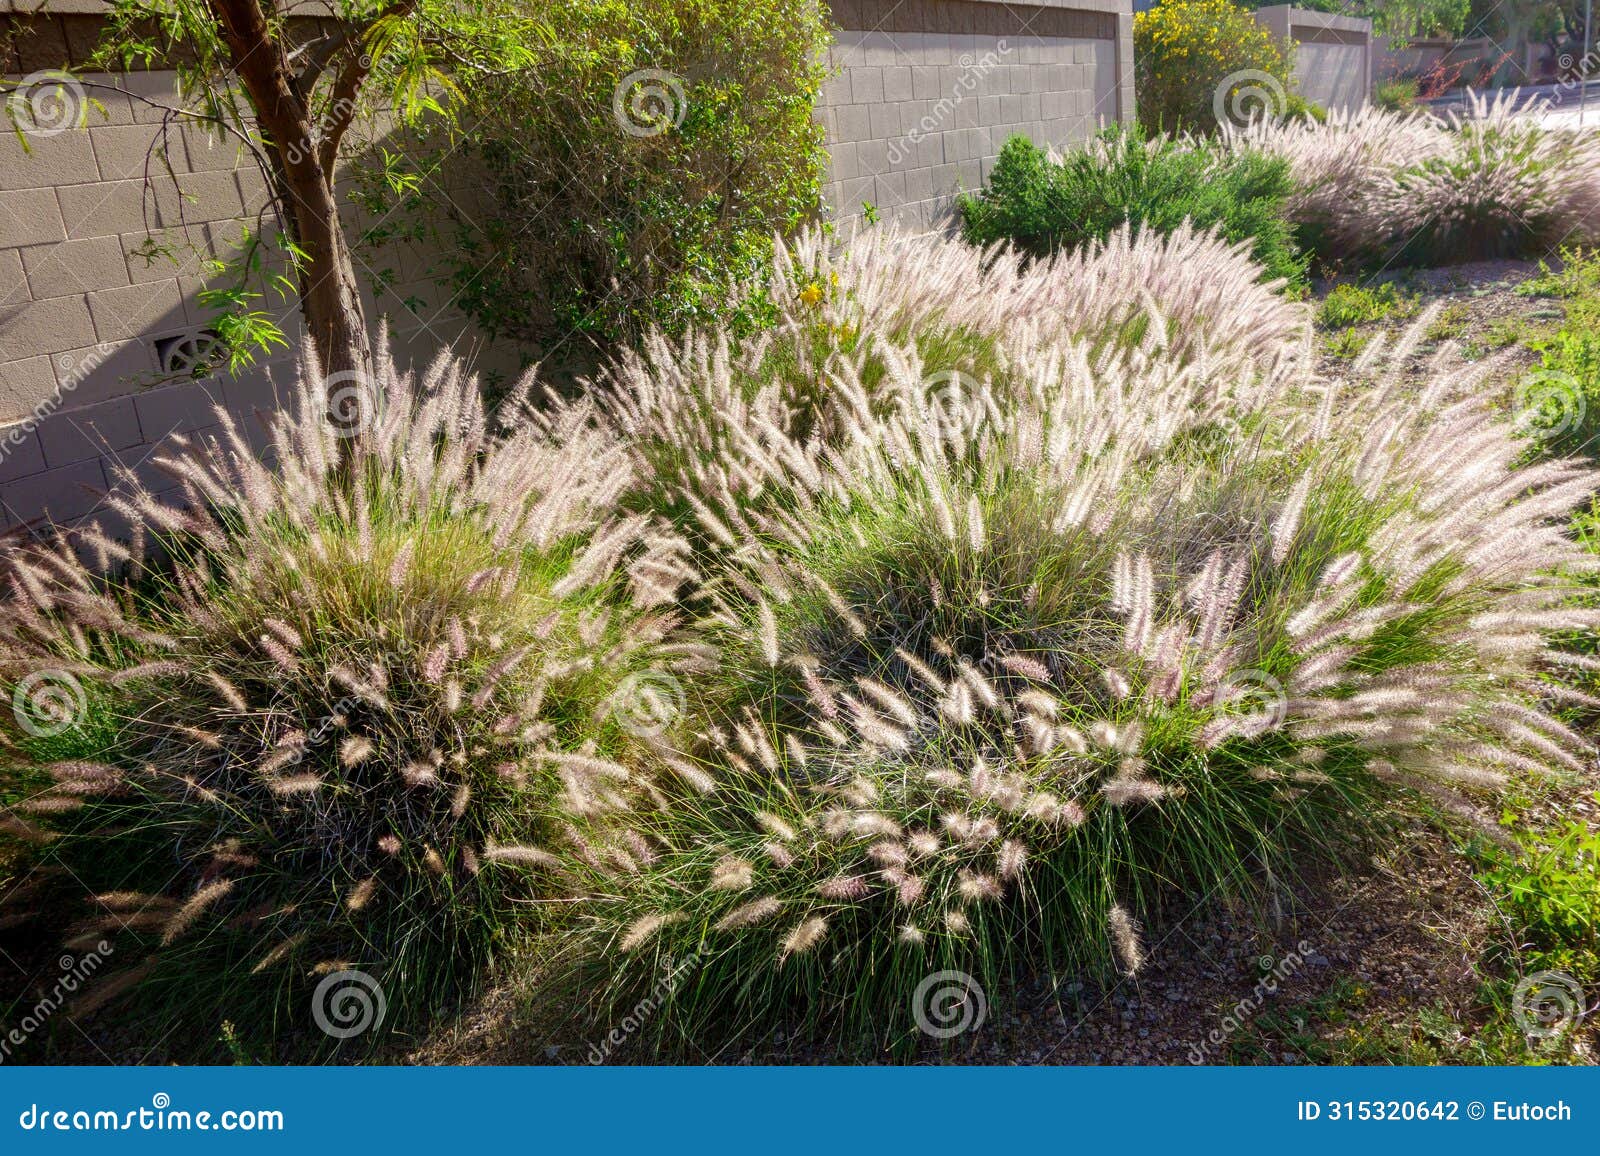 backlit shot of fountain grass (pennisetum setaceum) in xeriscaped road verge